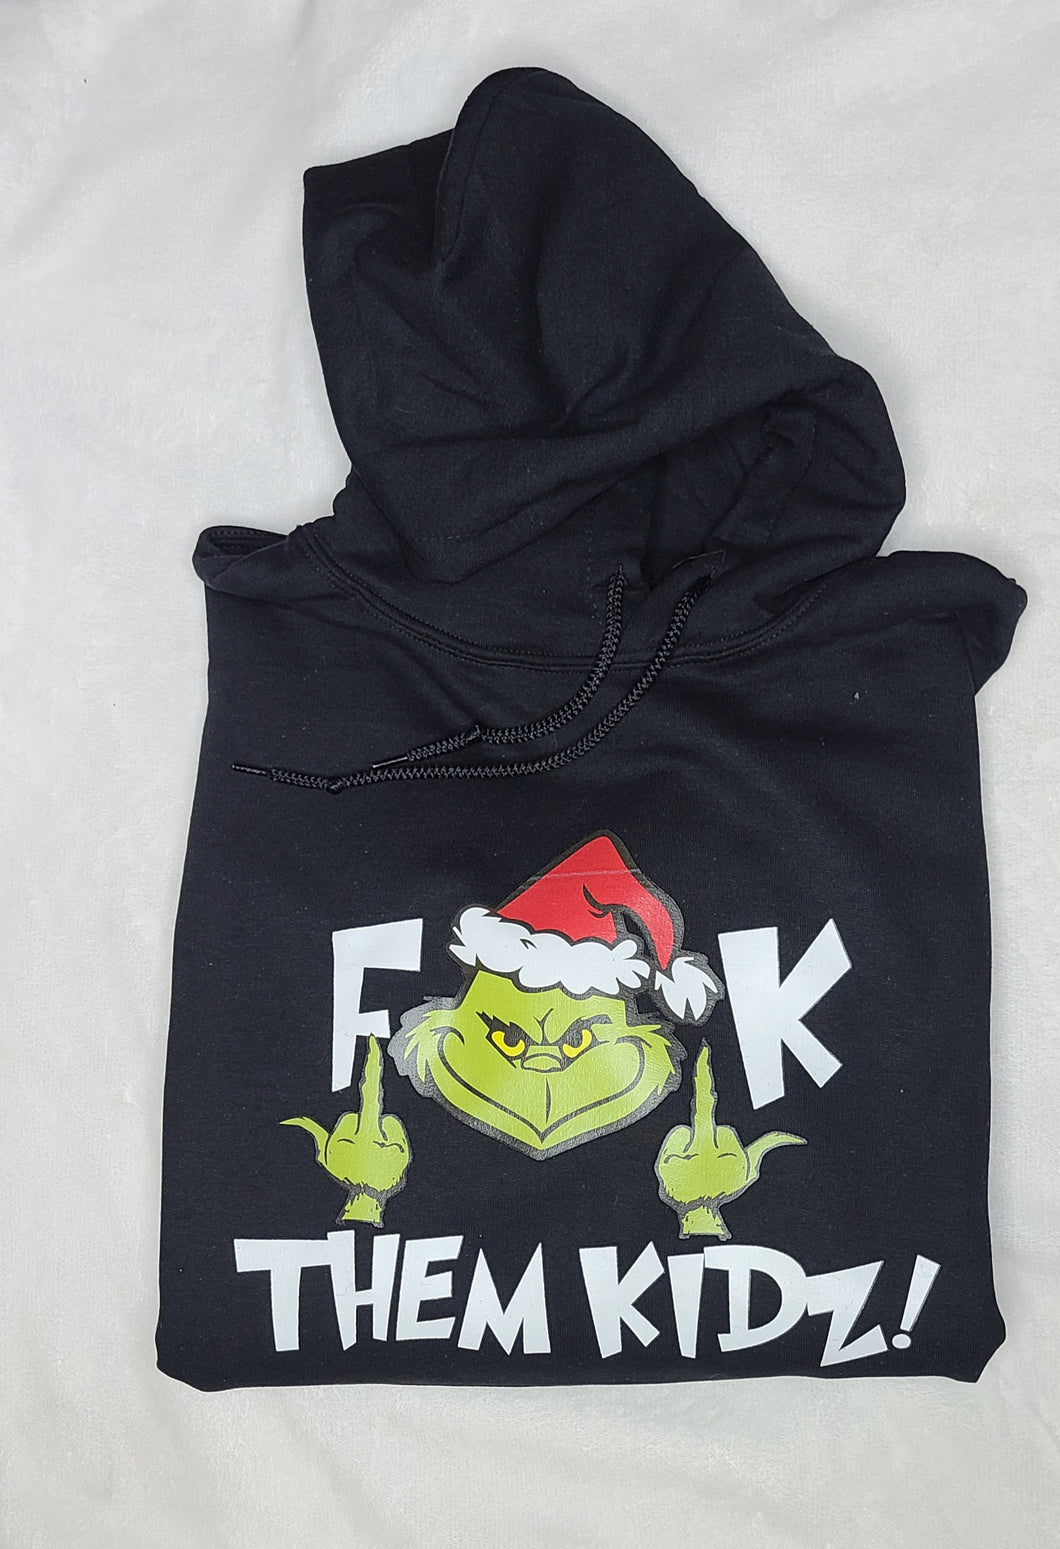 The Grinch hoodie